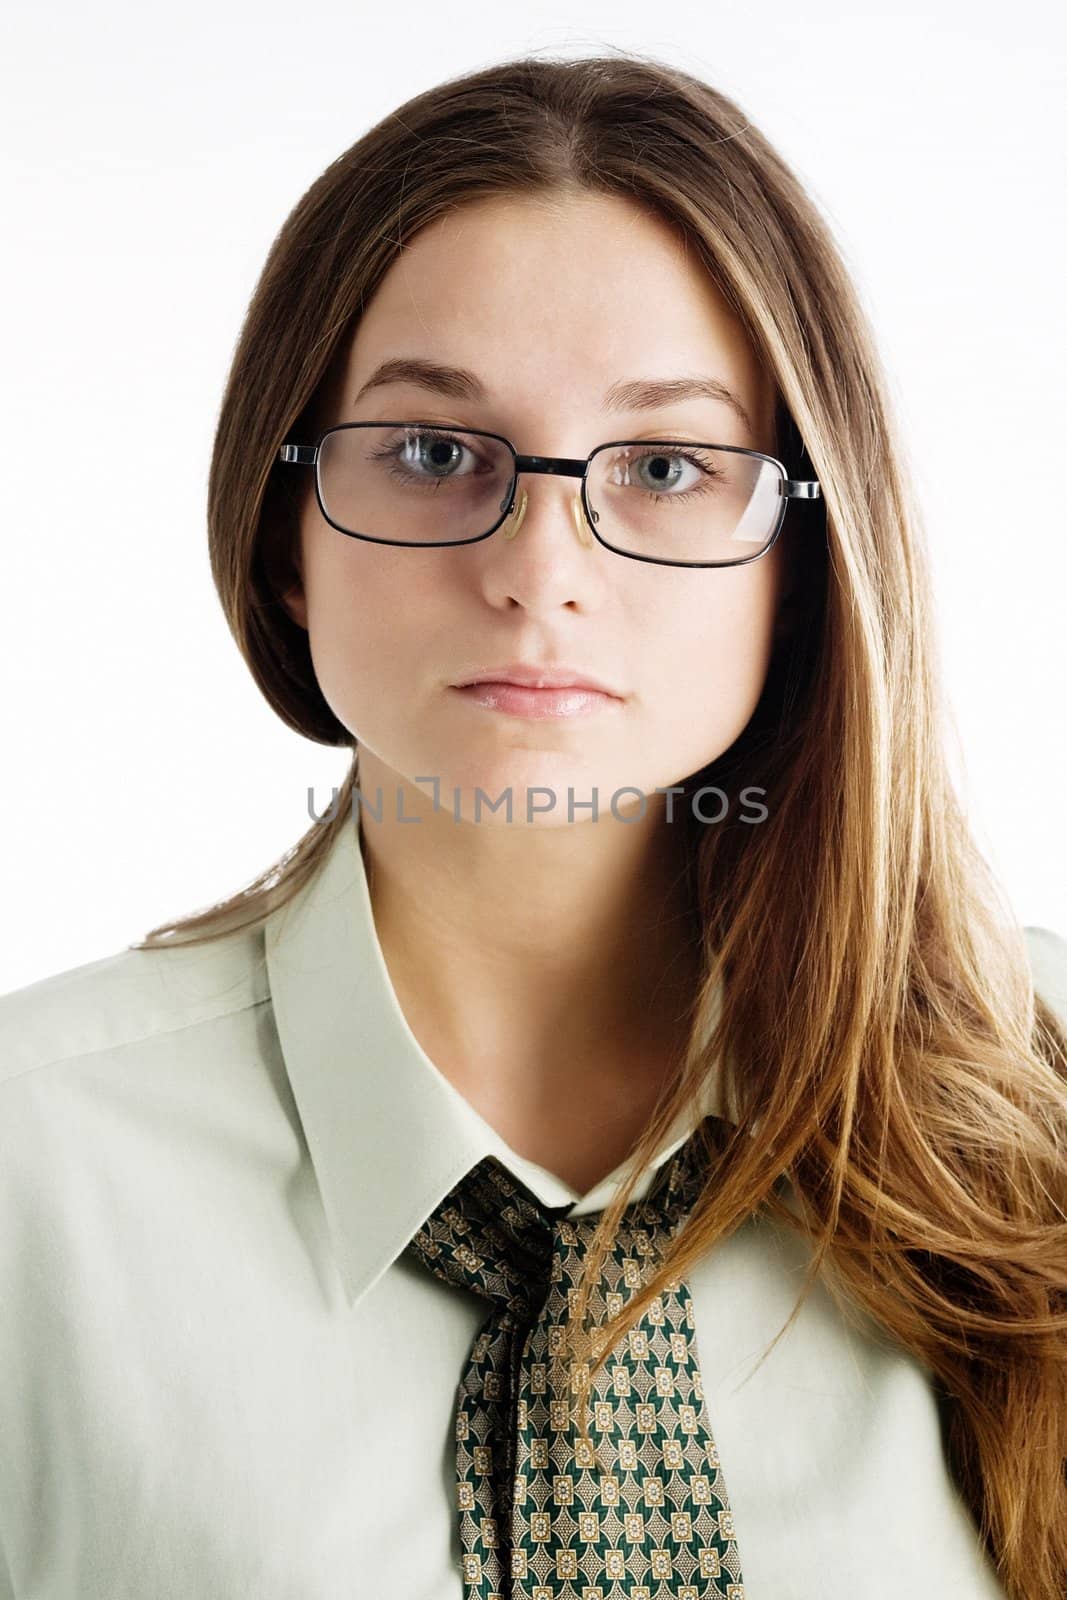 An image of a nice girl in glasses